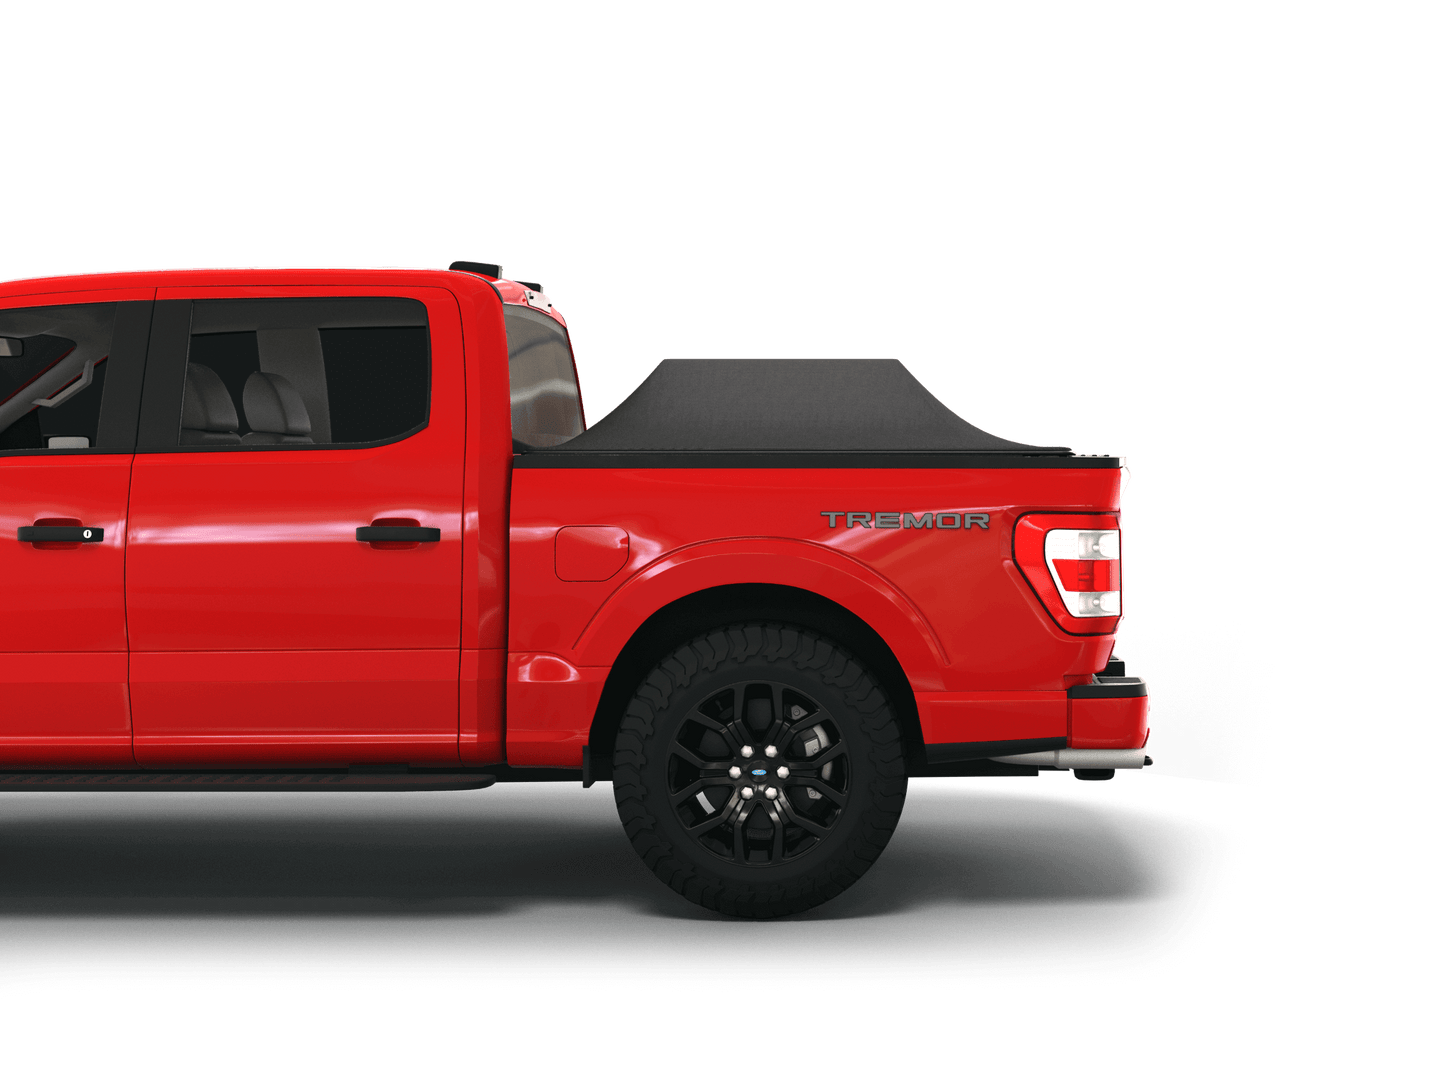 Red Ford F-250 / Ford F-350 with Sawtooth Stretch tonneau cover expanded over cargo load